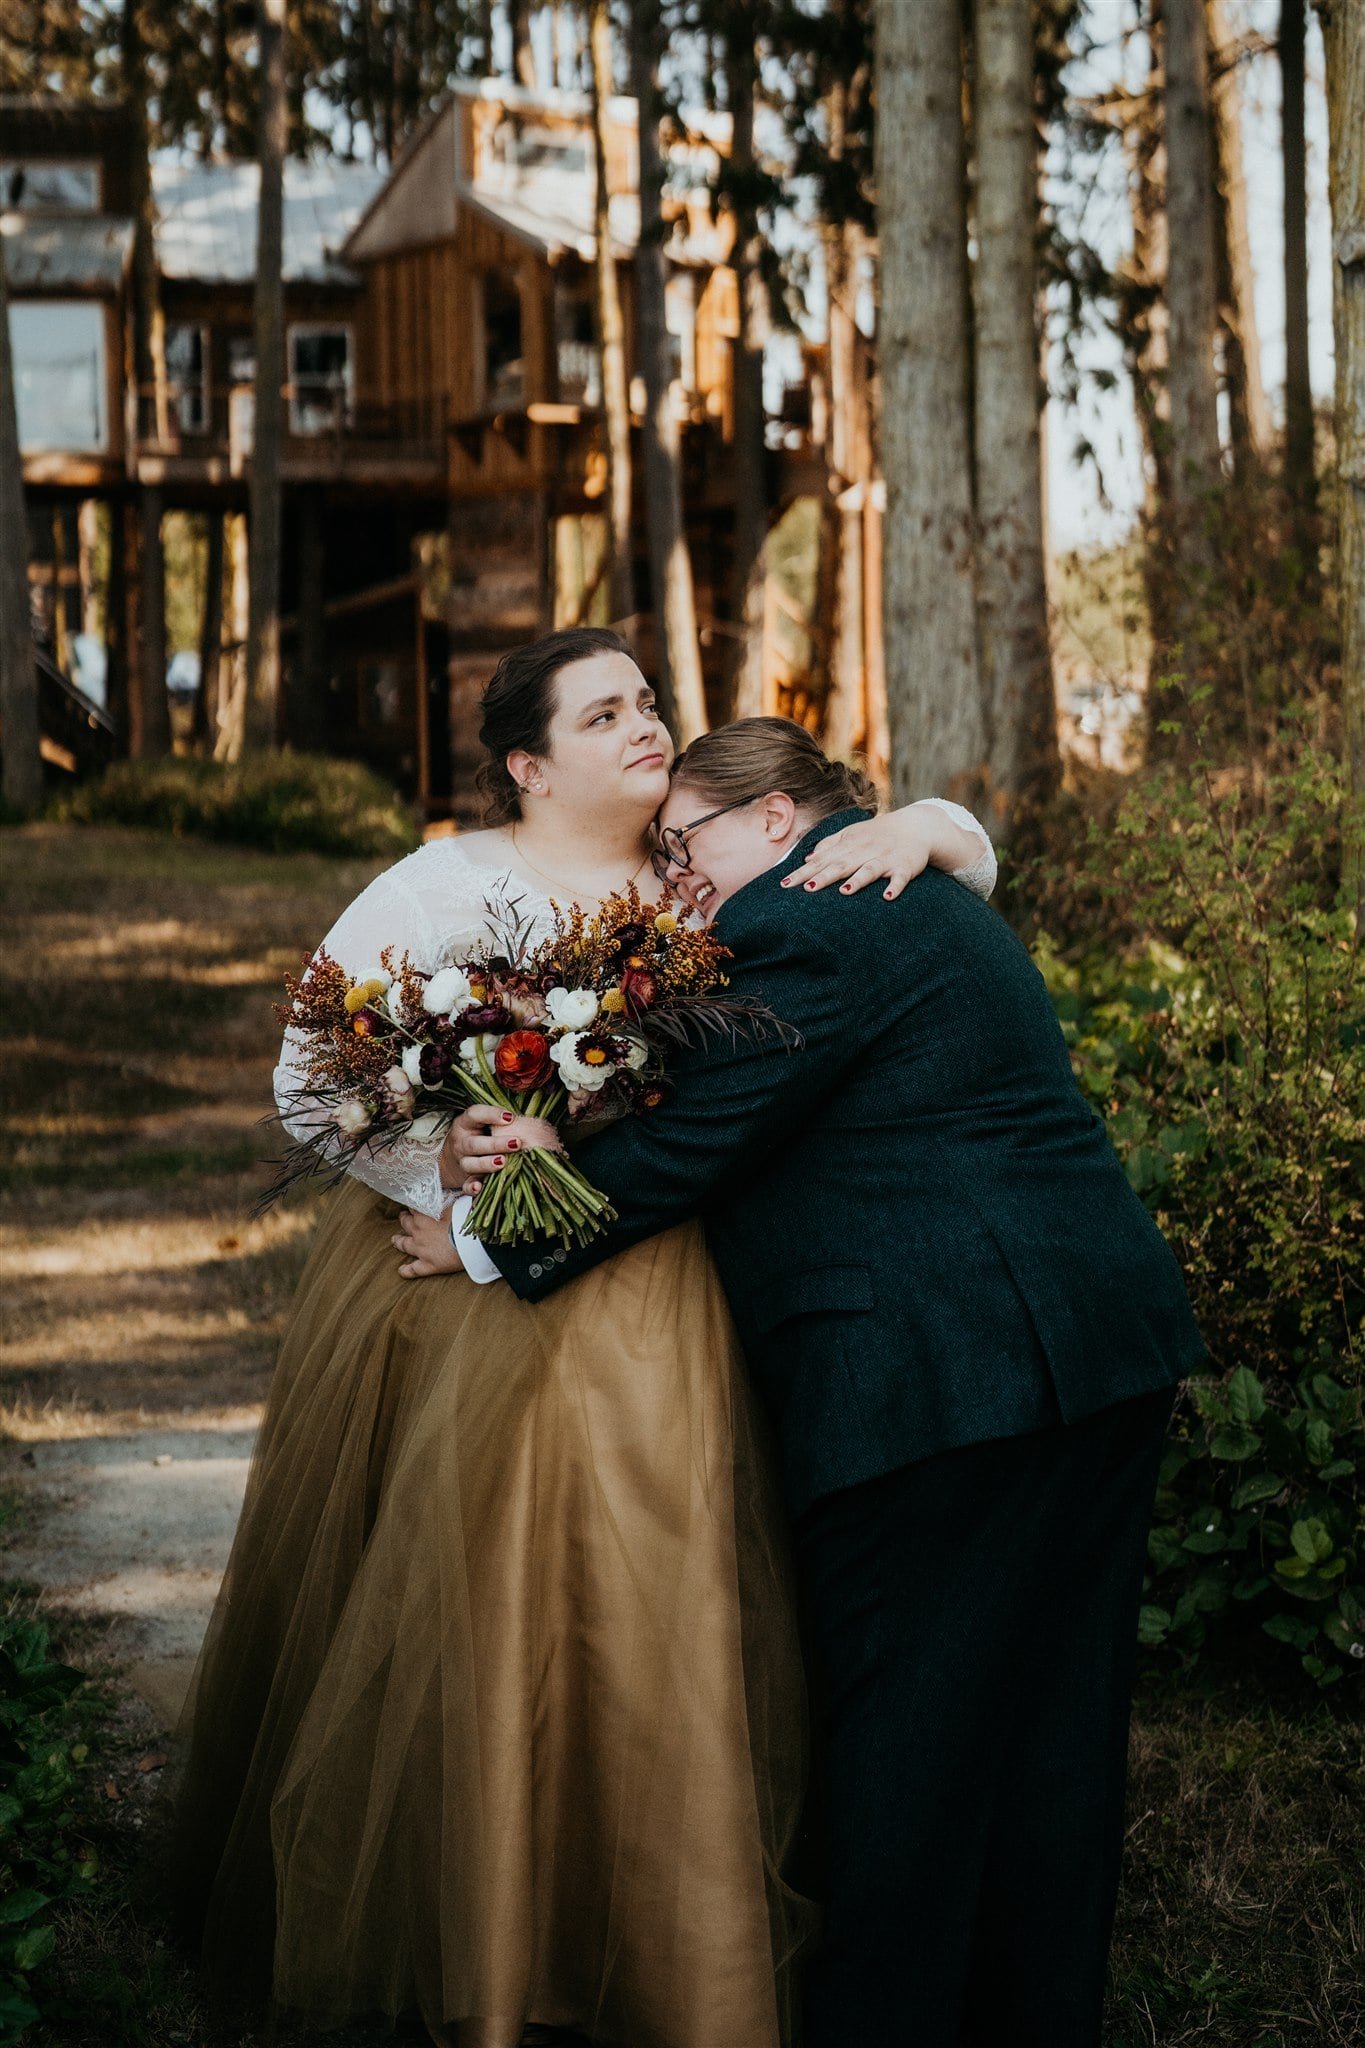 Brides hug and get emotional after first look in the forest in Olympic National Park